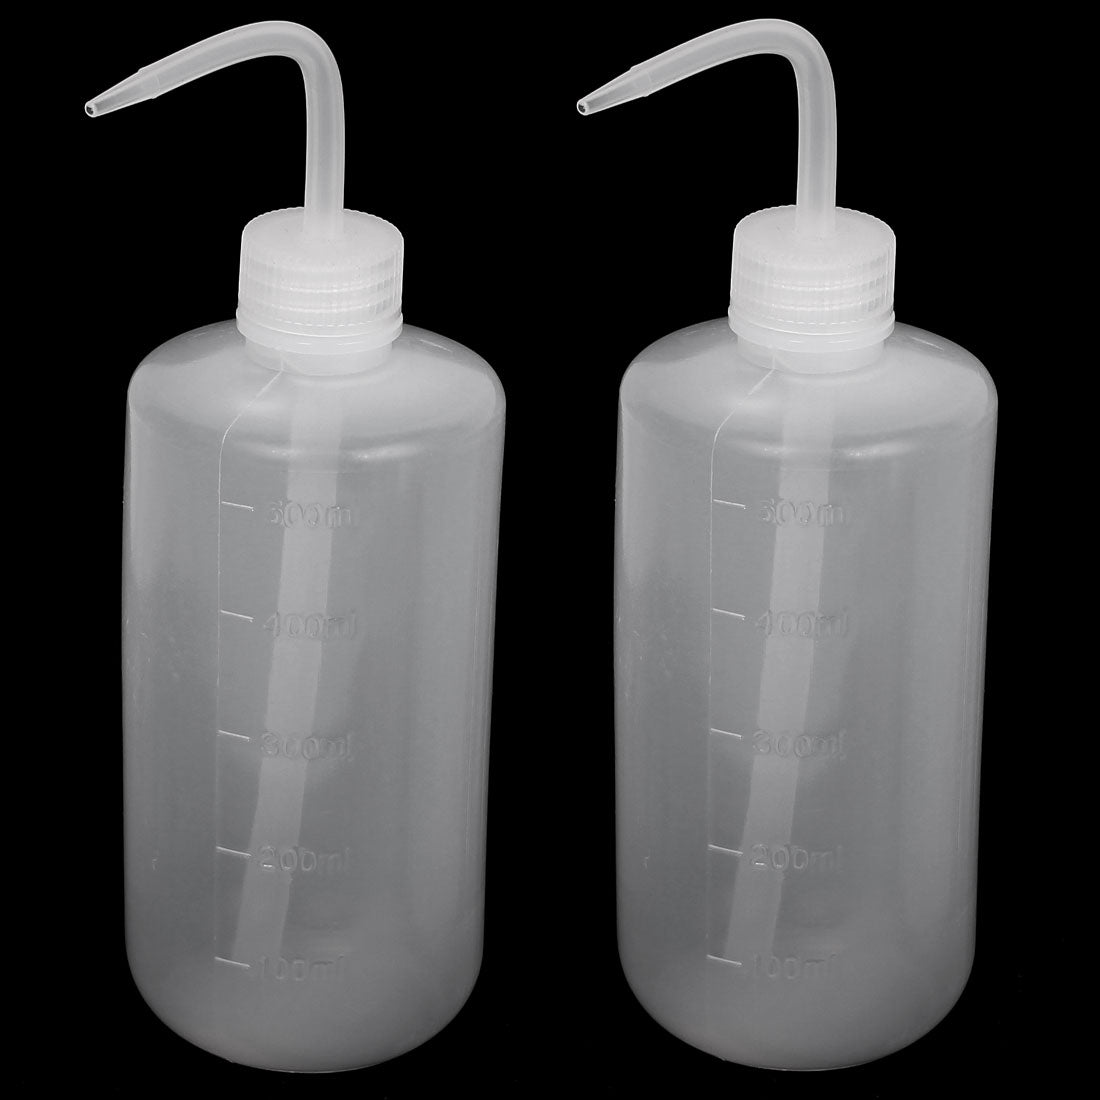 uxcell Uxcell Lab Right Angle Bent Tip Plastic Liquid Storage Squeeze Bottle Dispenser 500mL 2pcs